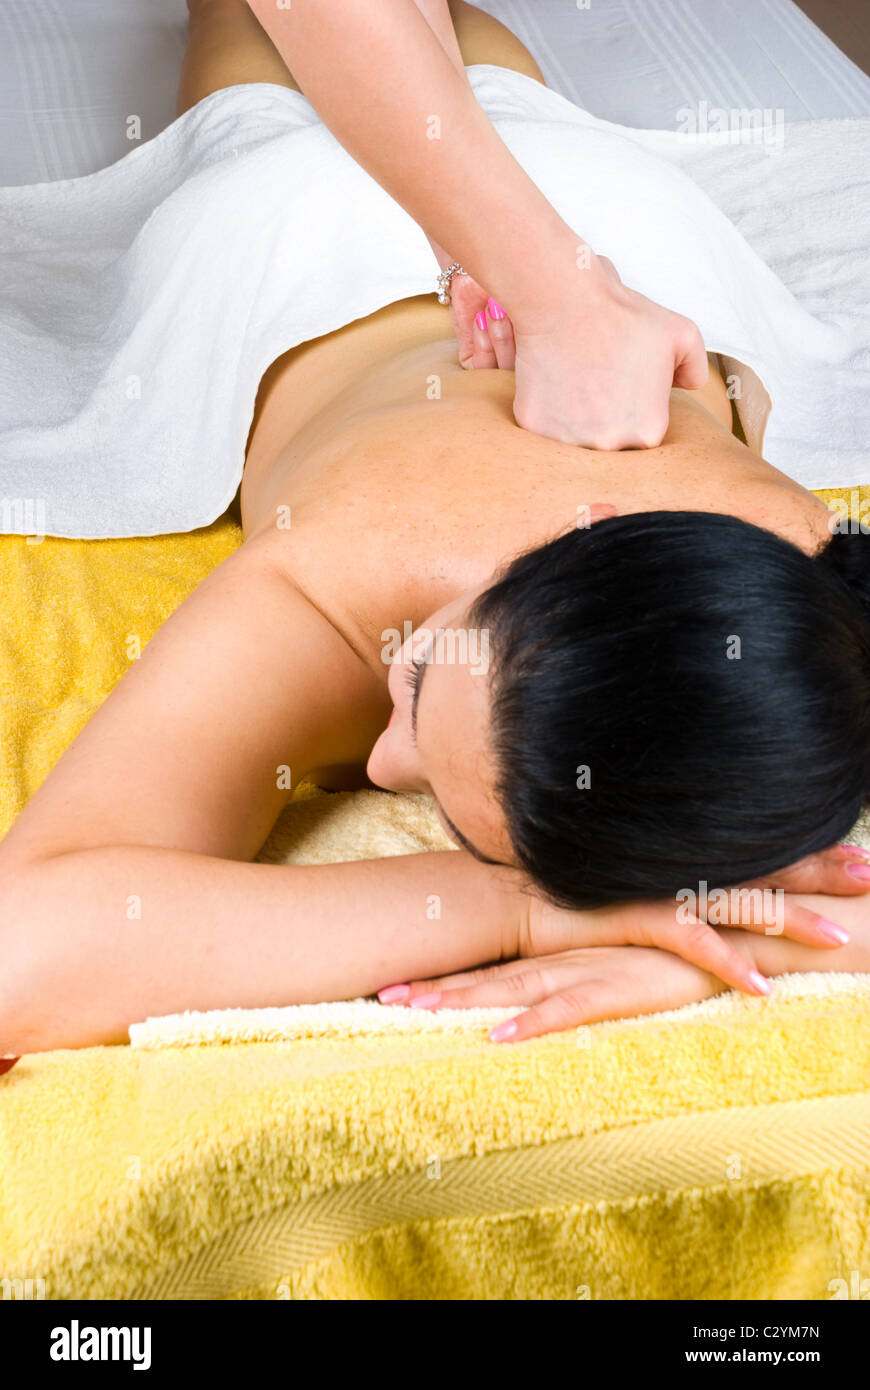 Young female receiving a deep massage on back at spa salon Stock Photo